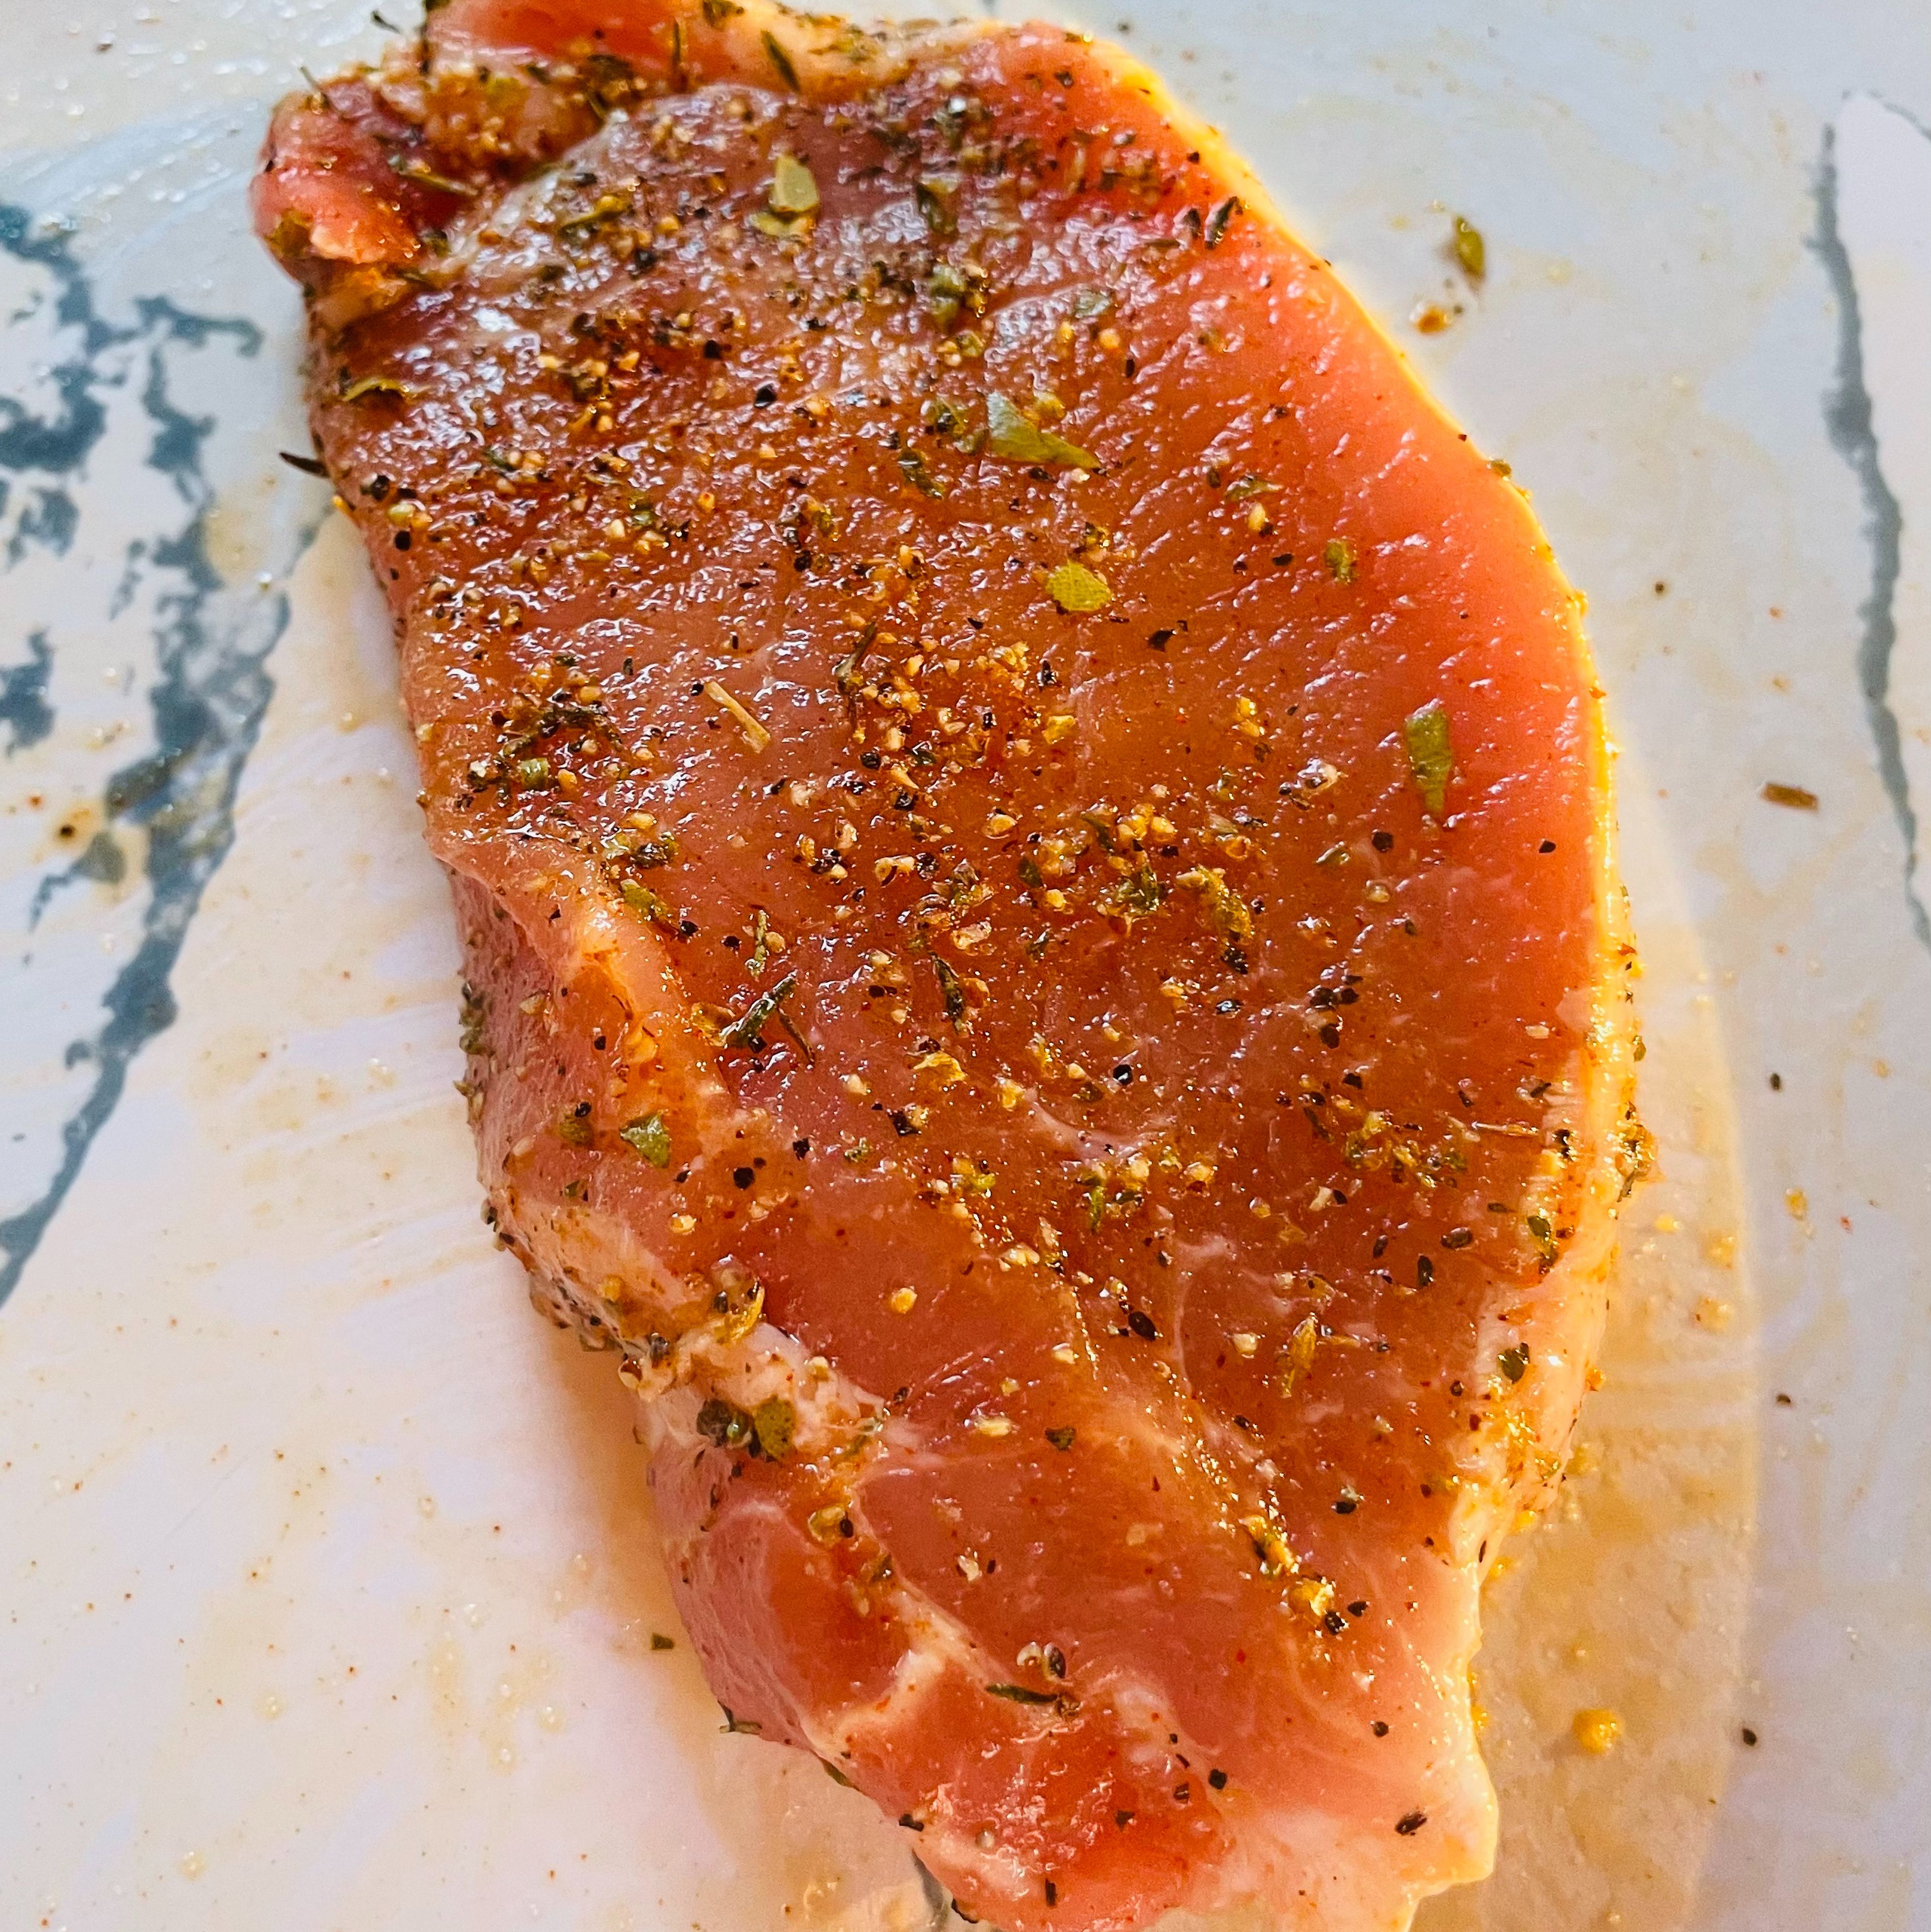 Rub pork loin with salt, olive oil, black peppers, smoked paprika powder, mixed herbs and garlic powder